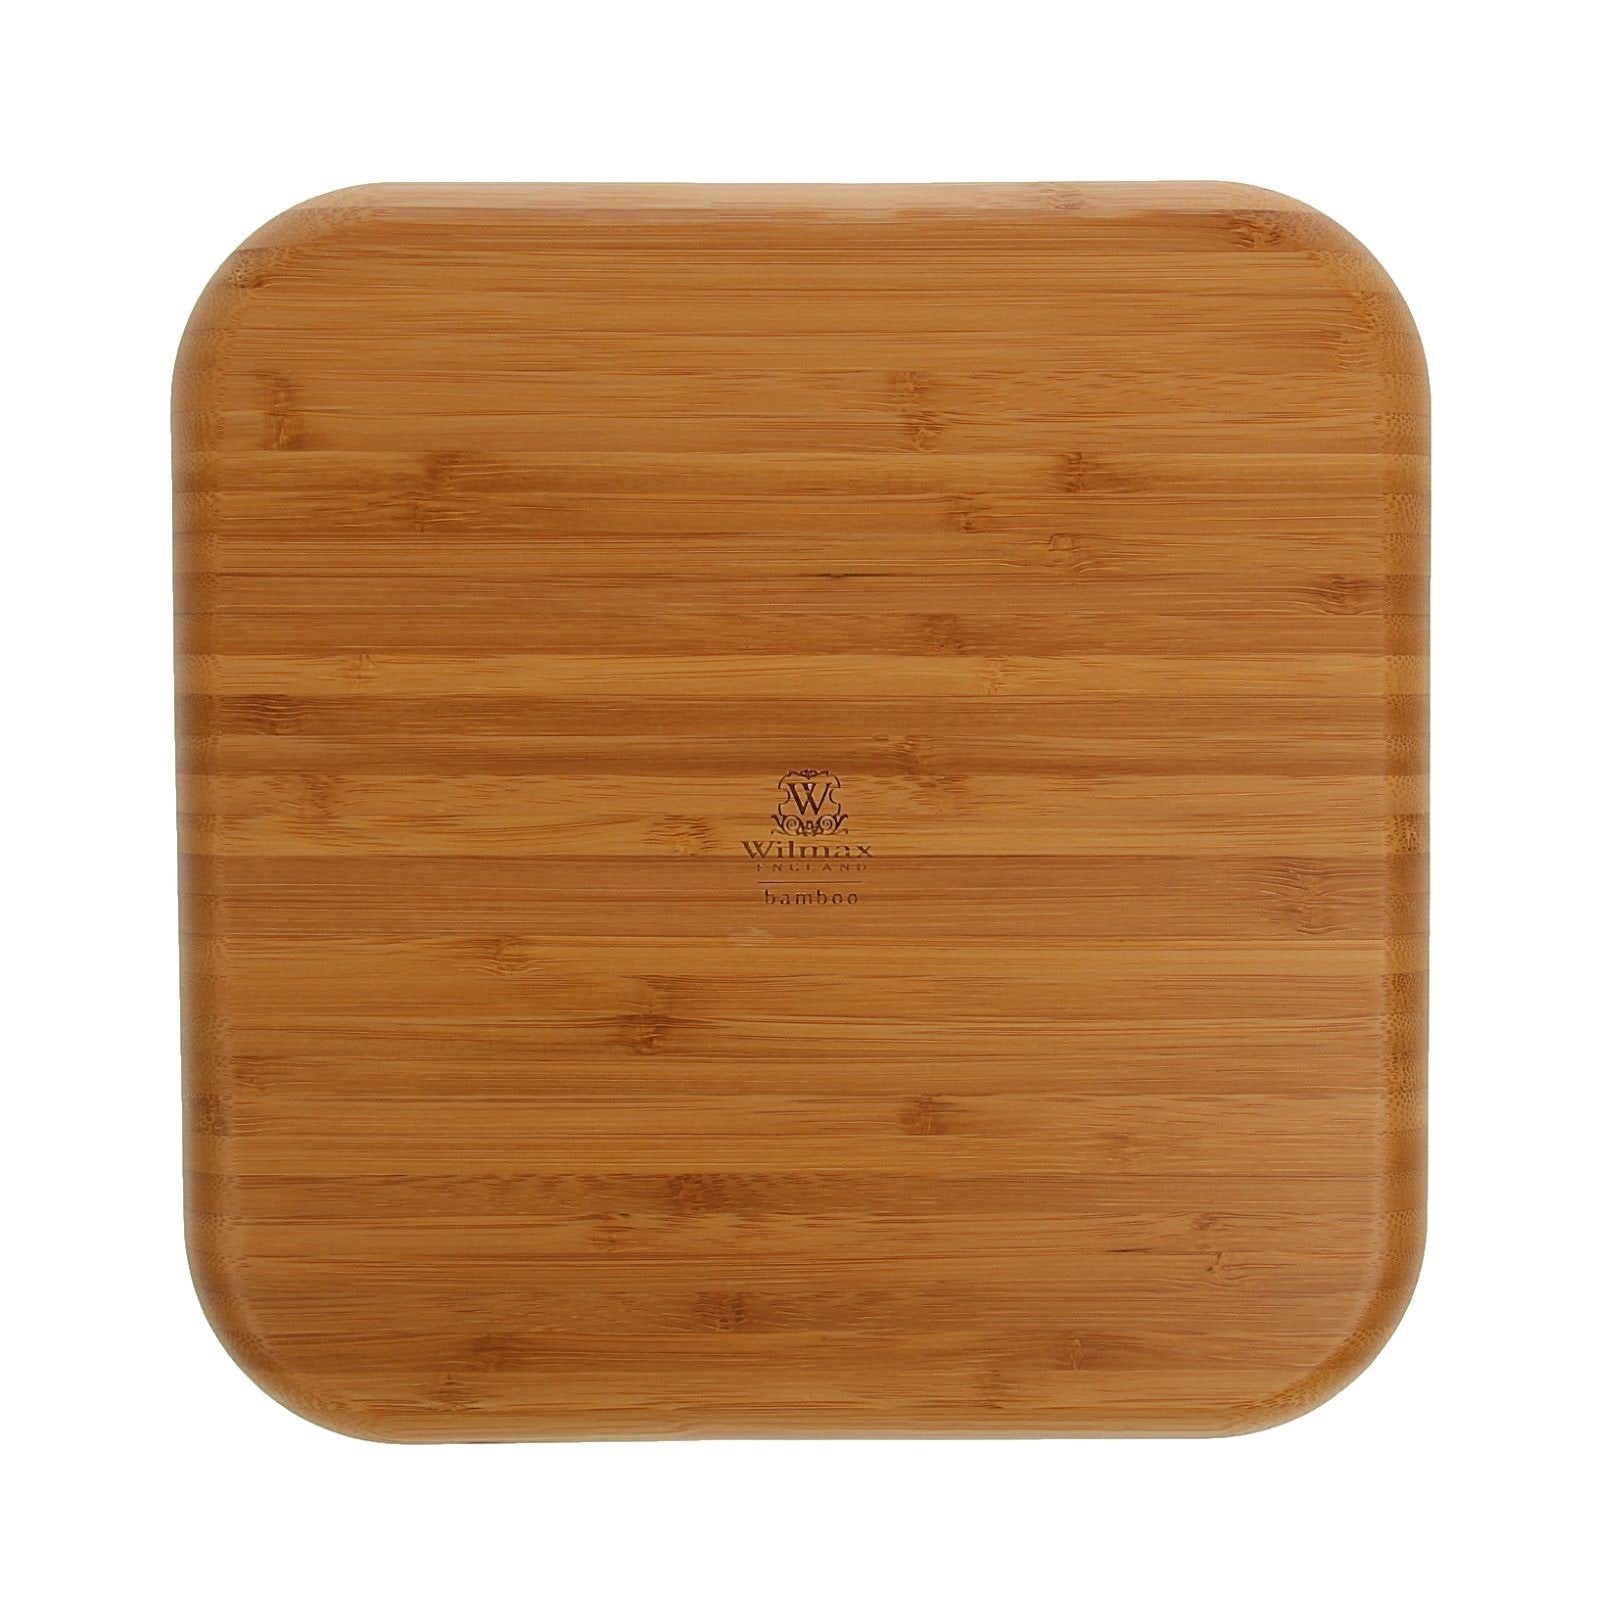 Bamboo Square Plate 11" inch X 11" inch -2